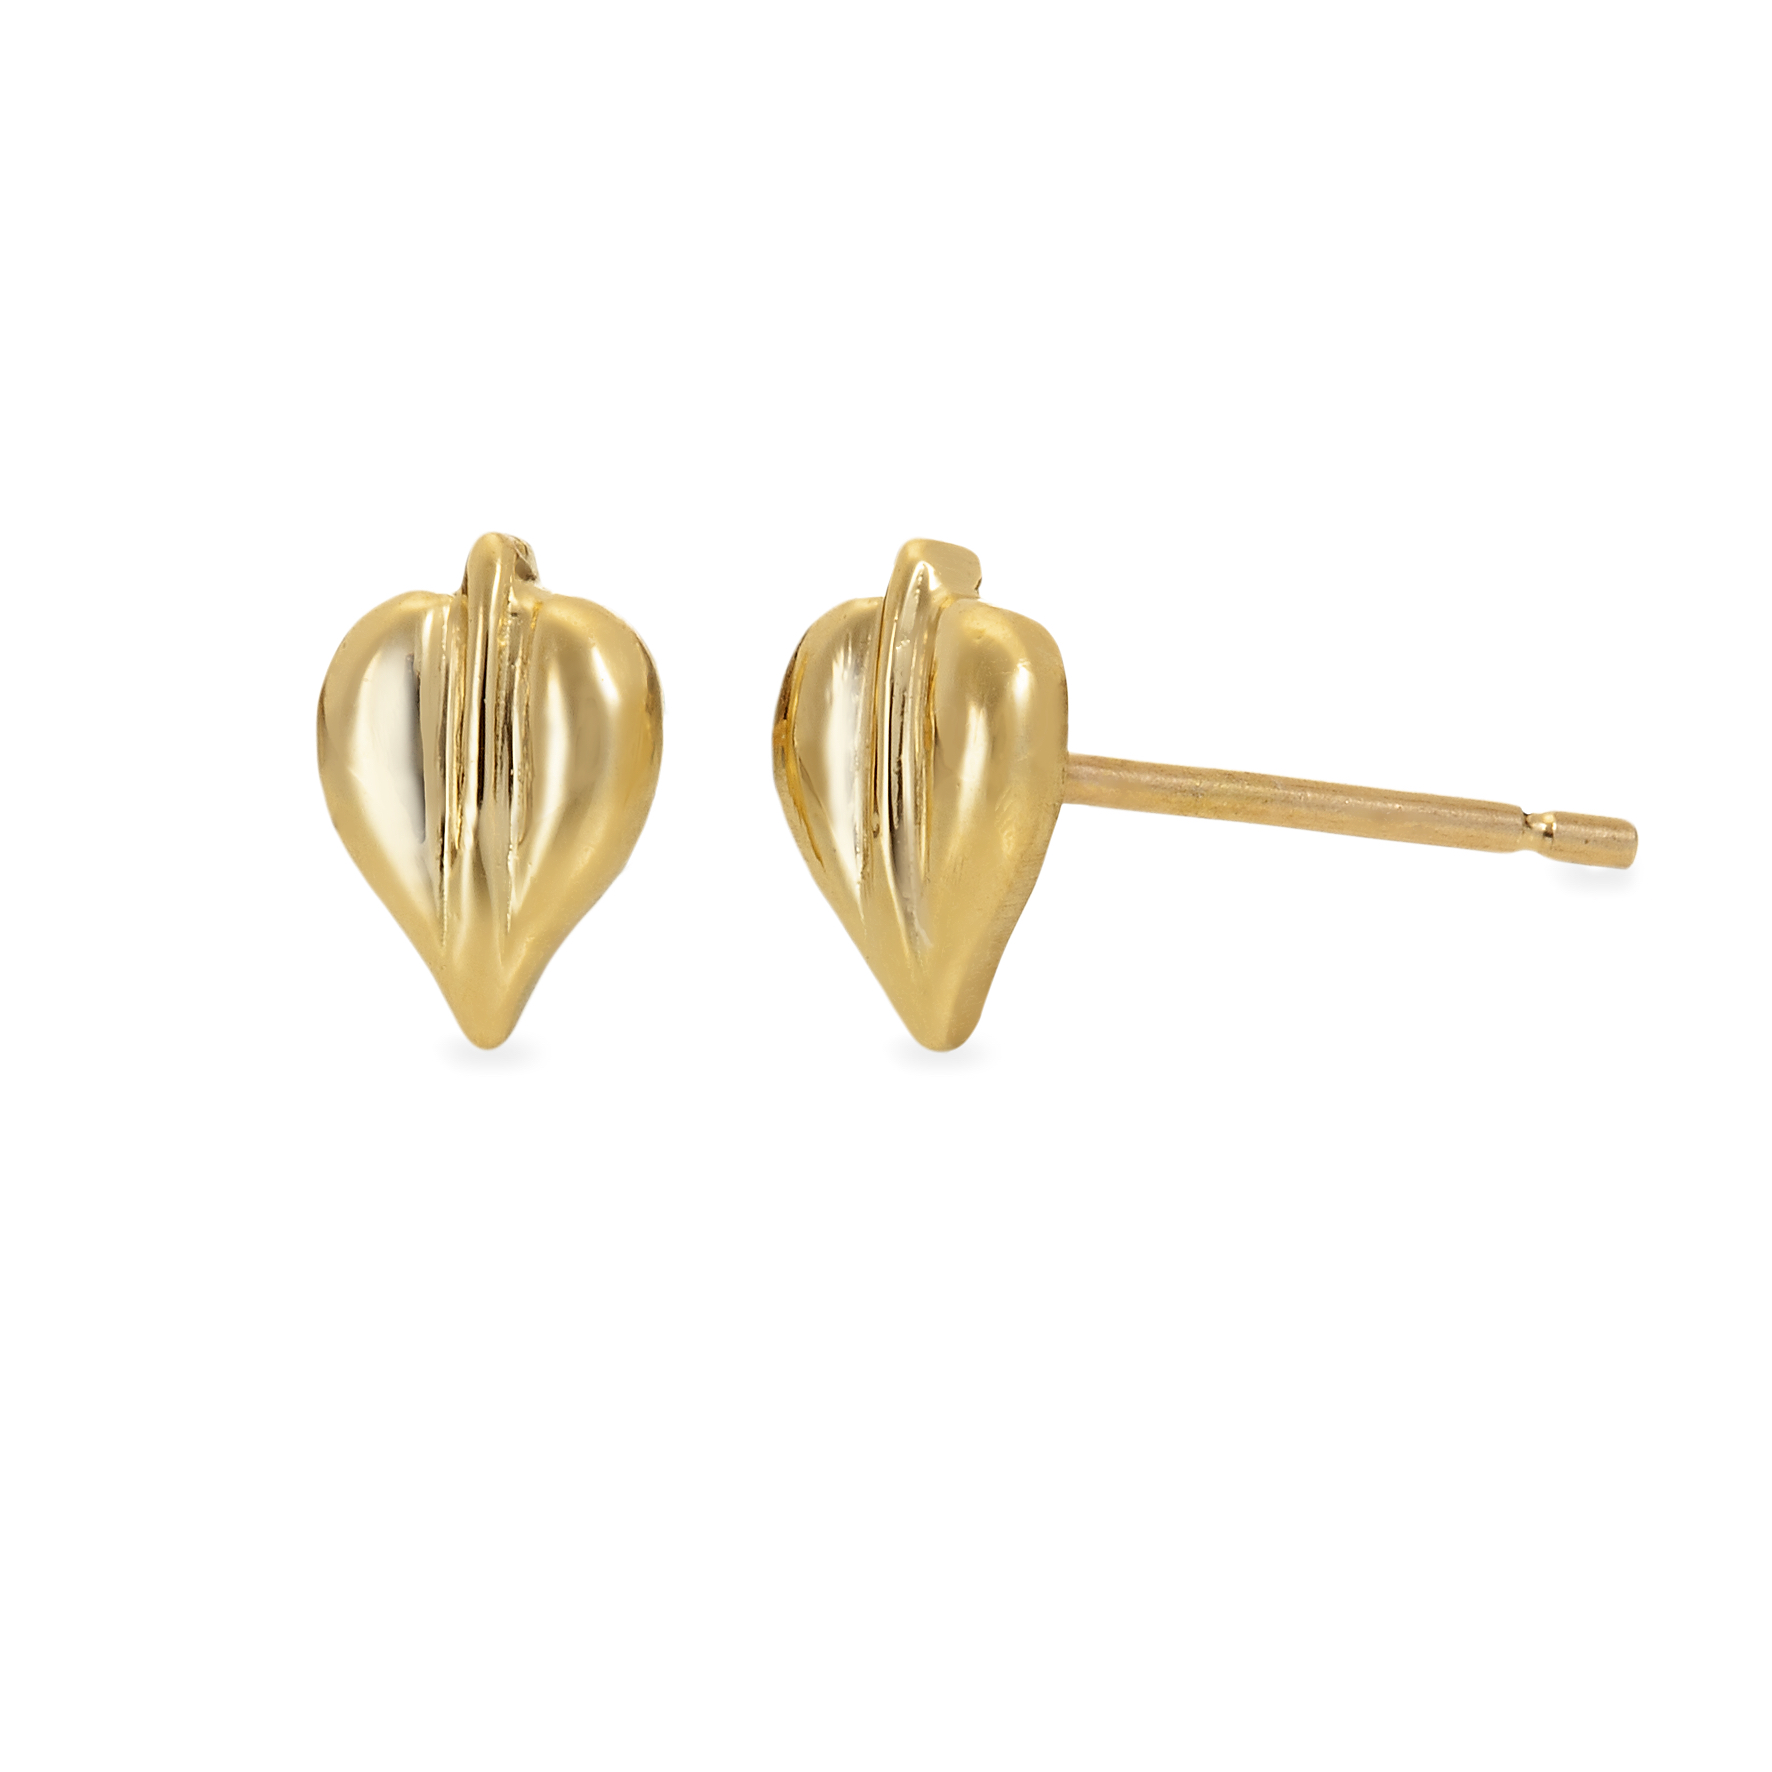 Christina Malle Leaf Earrings in Fairmined 18 Karat Gold. The Flora Collection